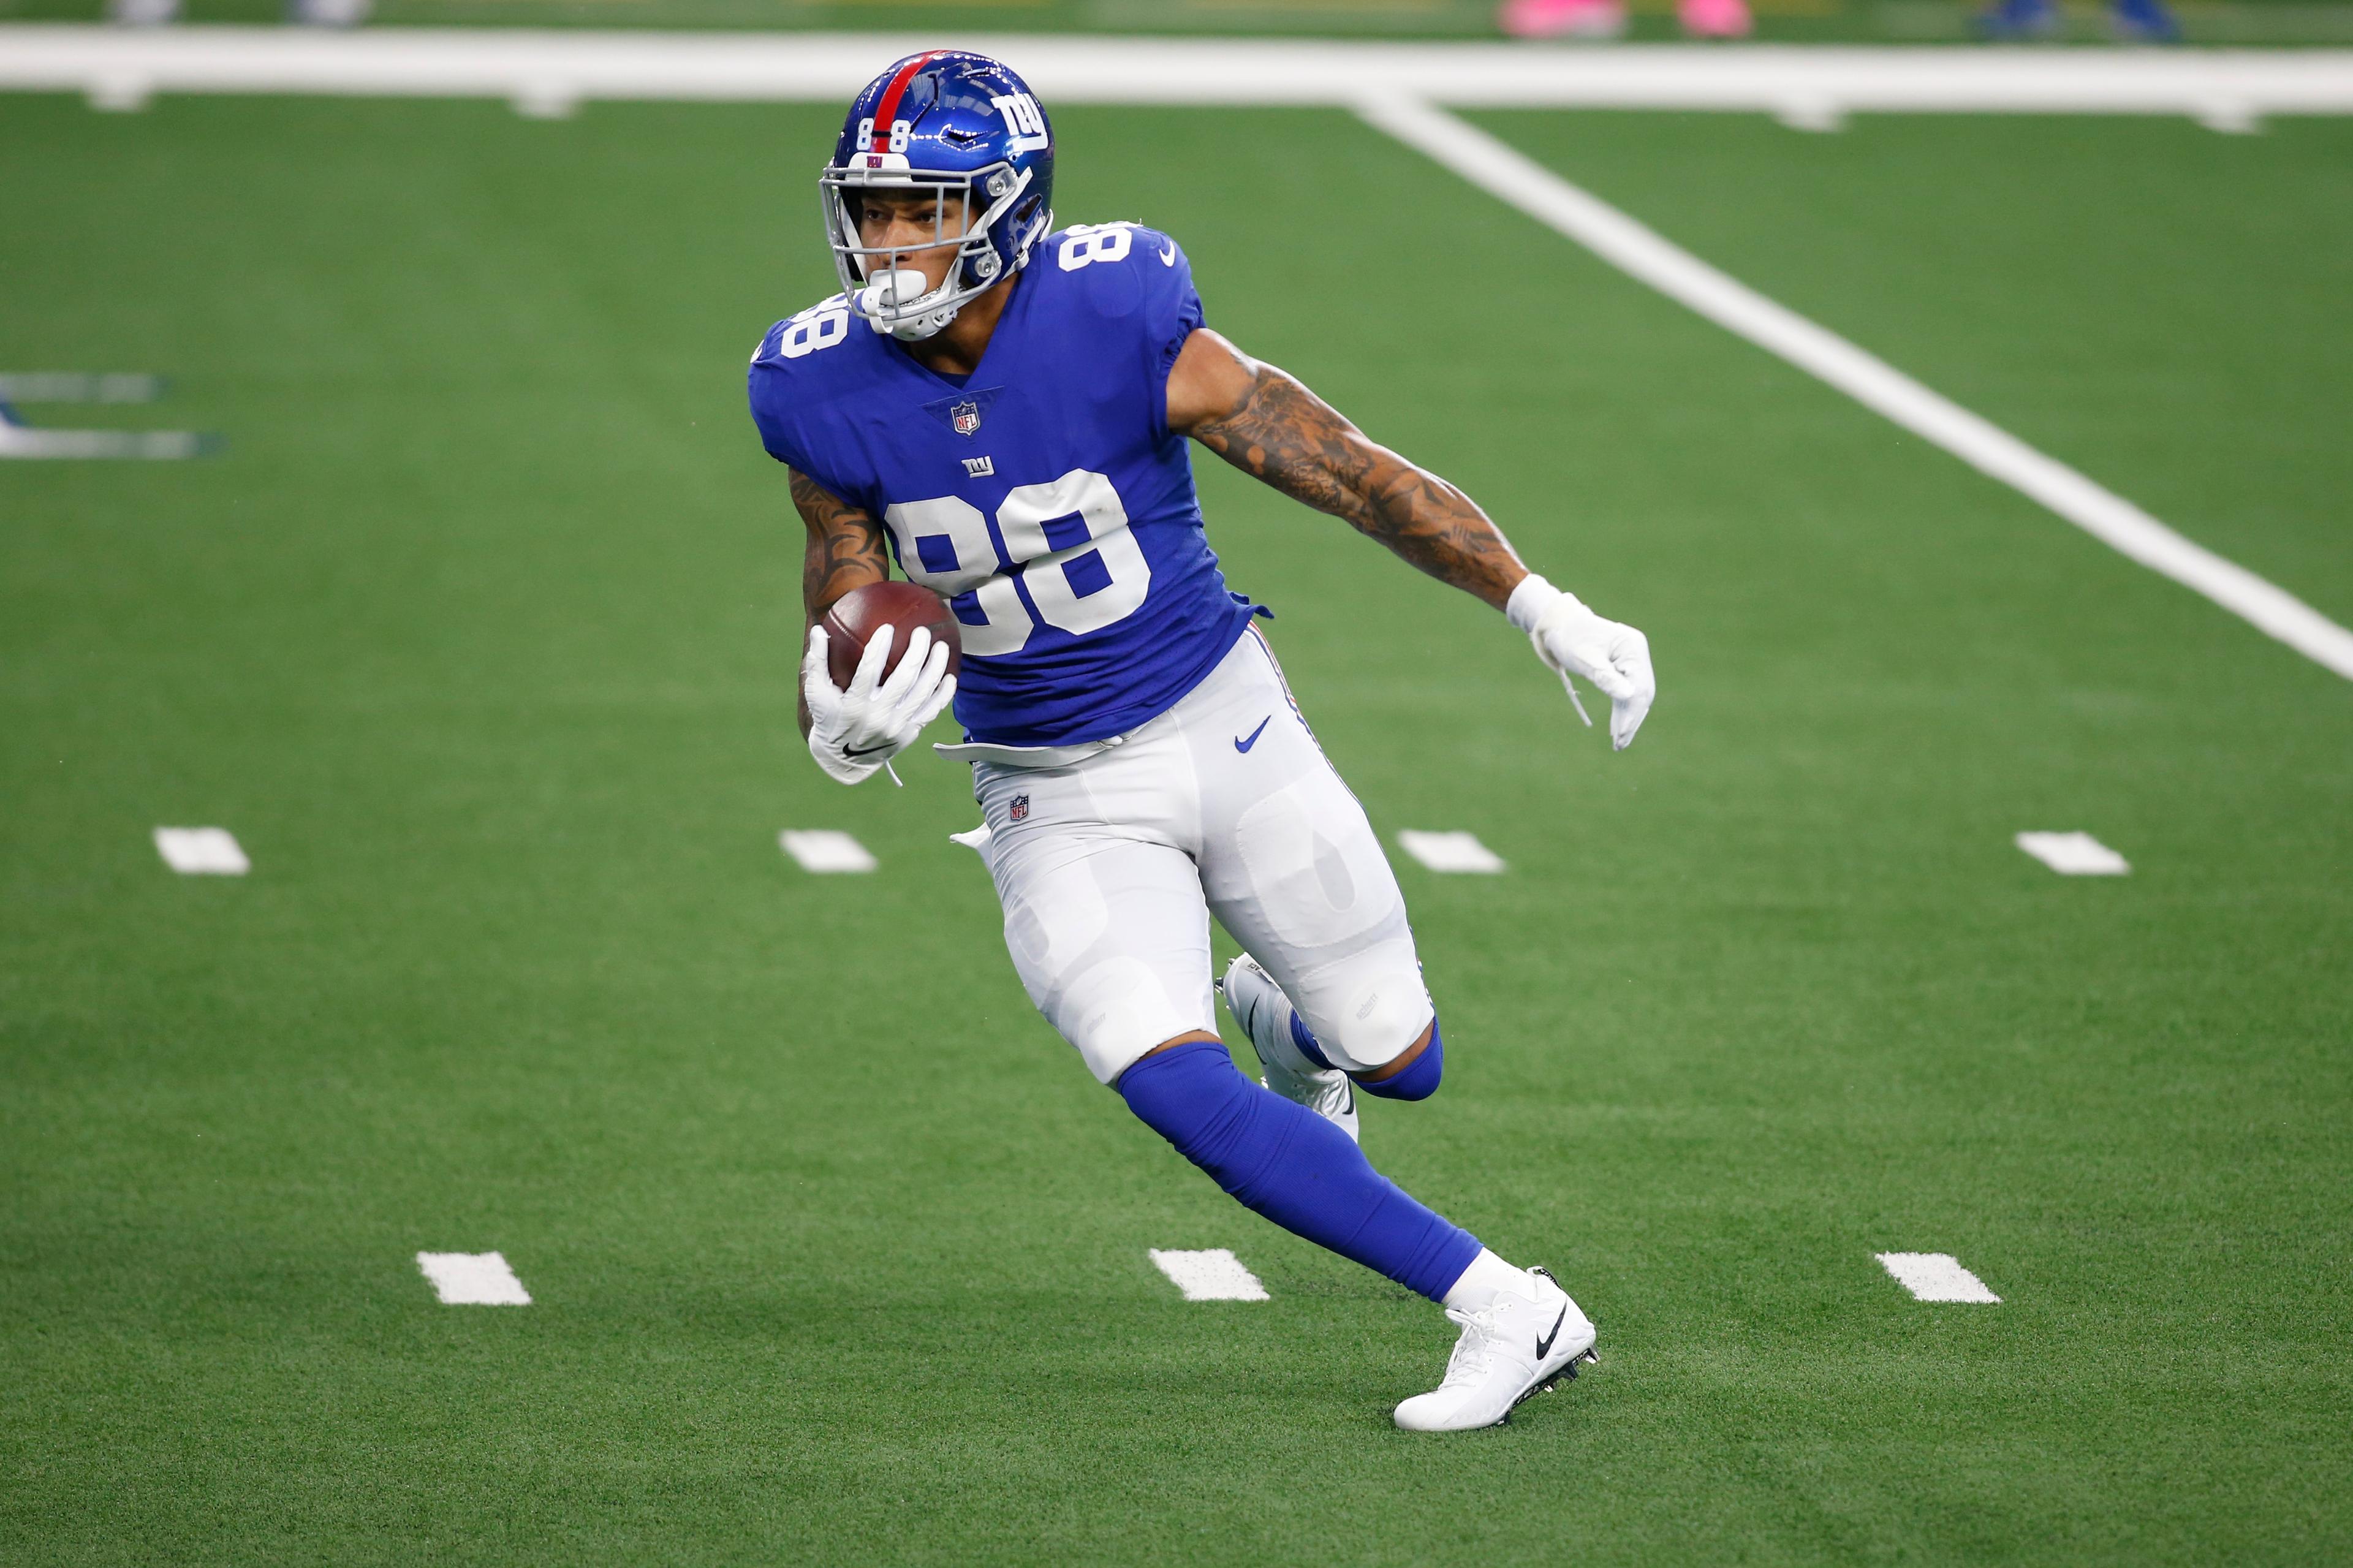 Oct 11, 2020; Arlington, Texas, USA; New York Giants tight end Evan Engram (88) runs a reverse for a touchdown in the first quarter against the Dallas Cowboys at AT&T Stadium. Mandatory Credit: Tim Heitman-USA TODAY Sports / © Tim Heitman-USA TODAY Sports